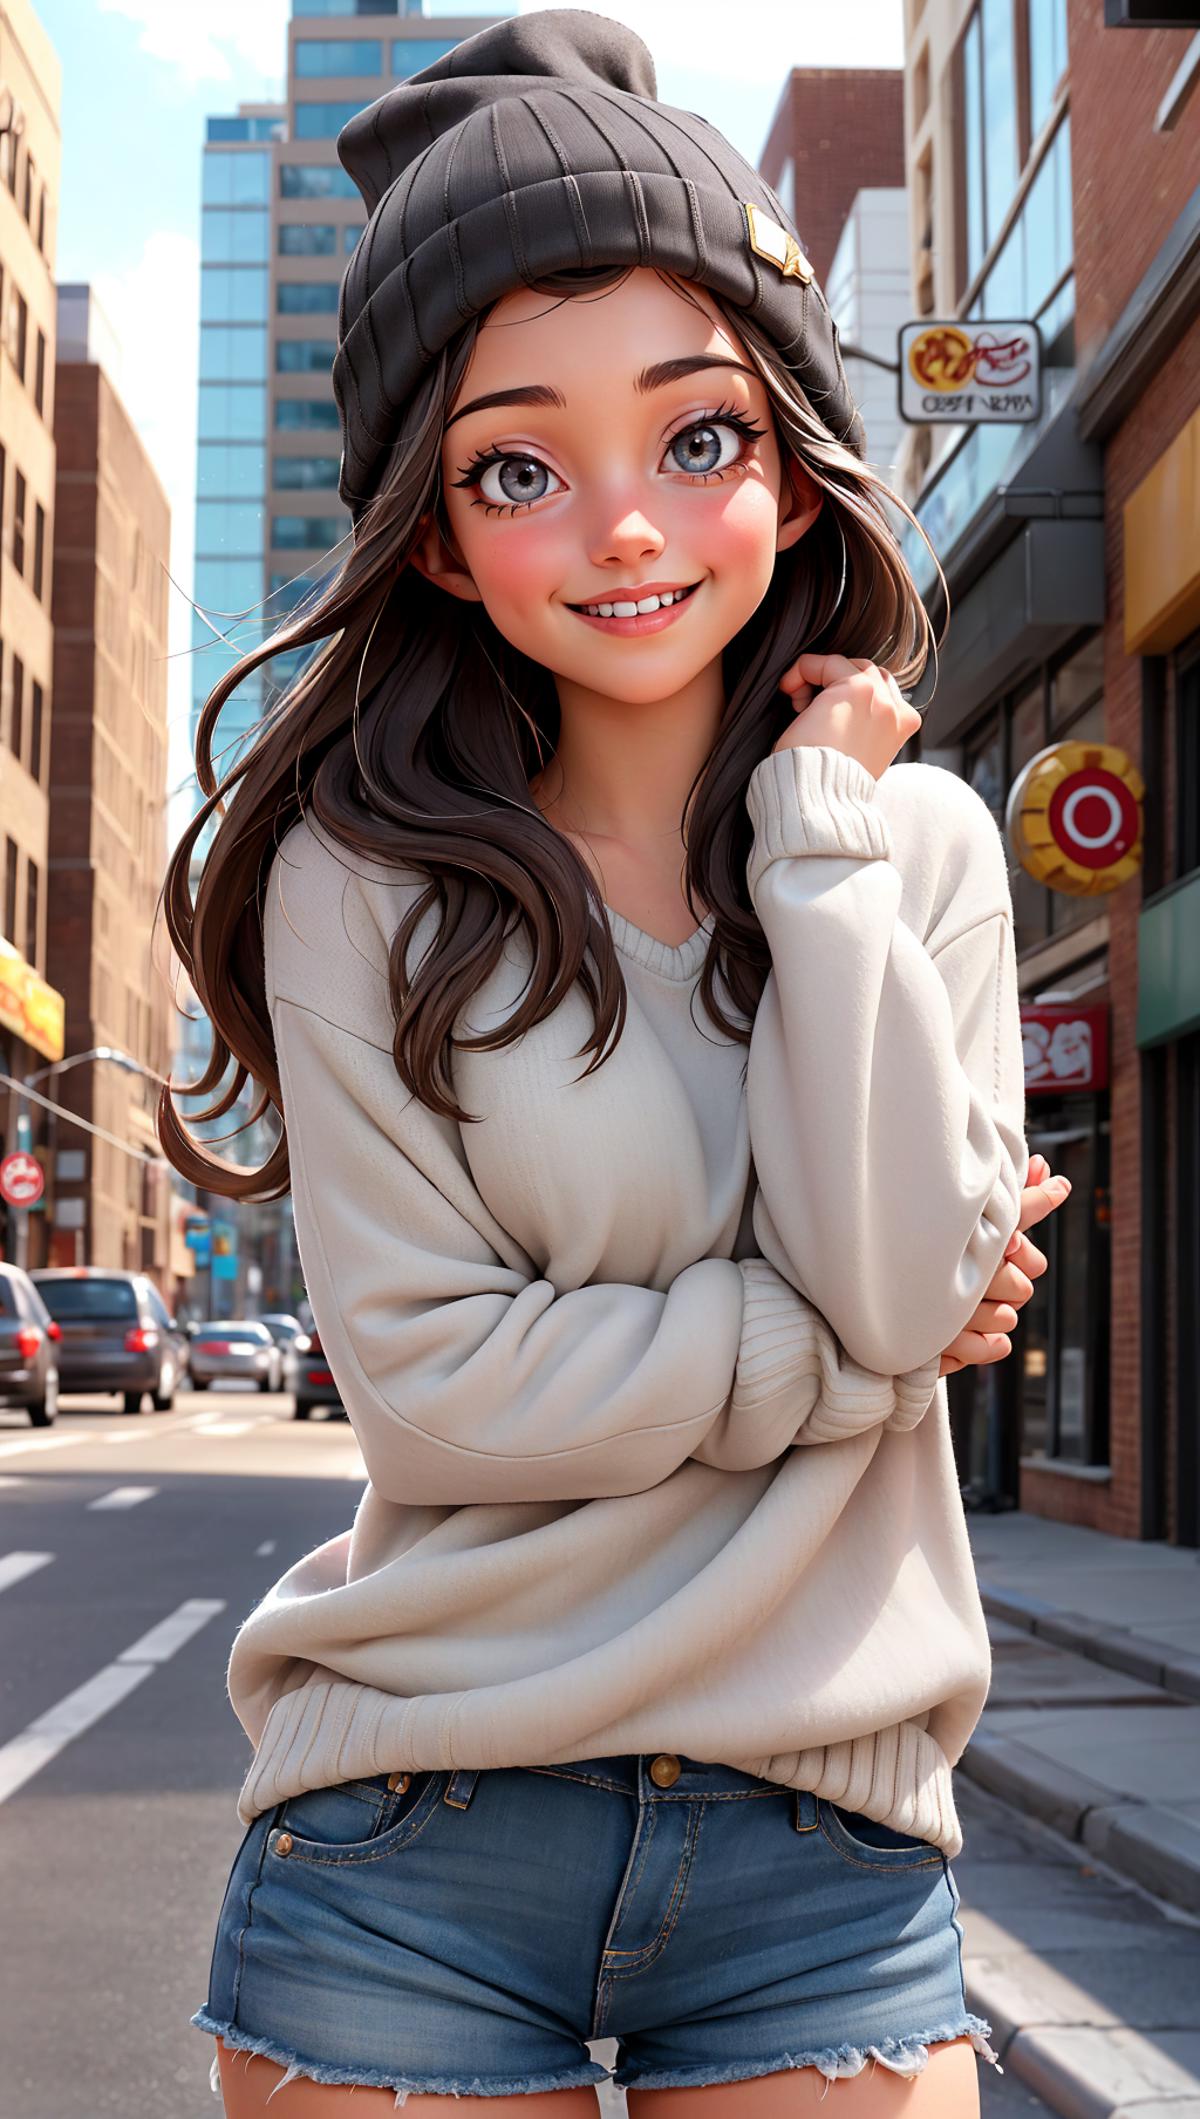 A computer-generated image of a woman in a beige sweater.